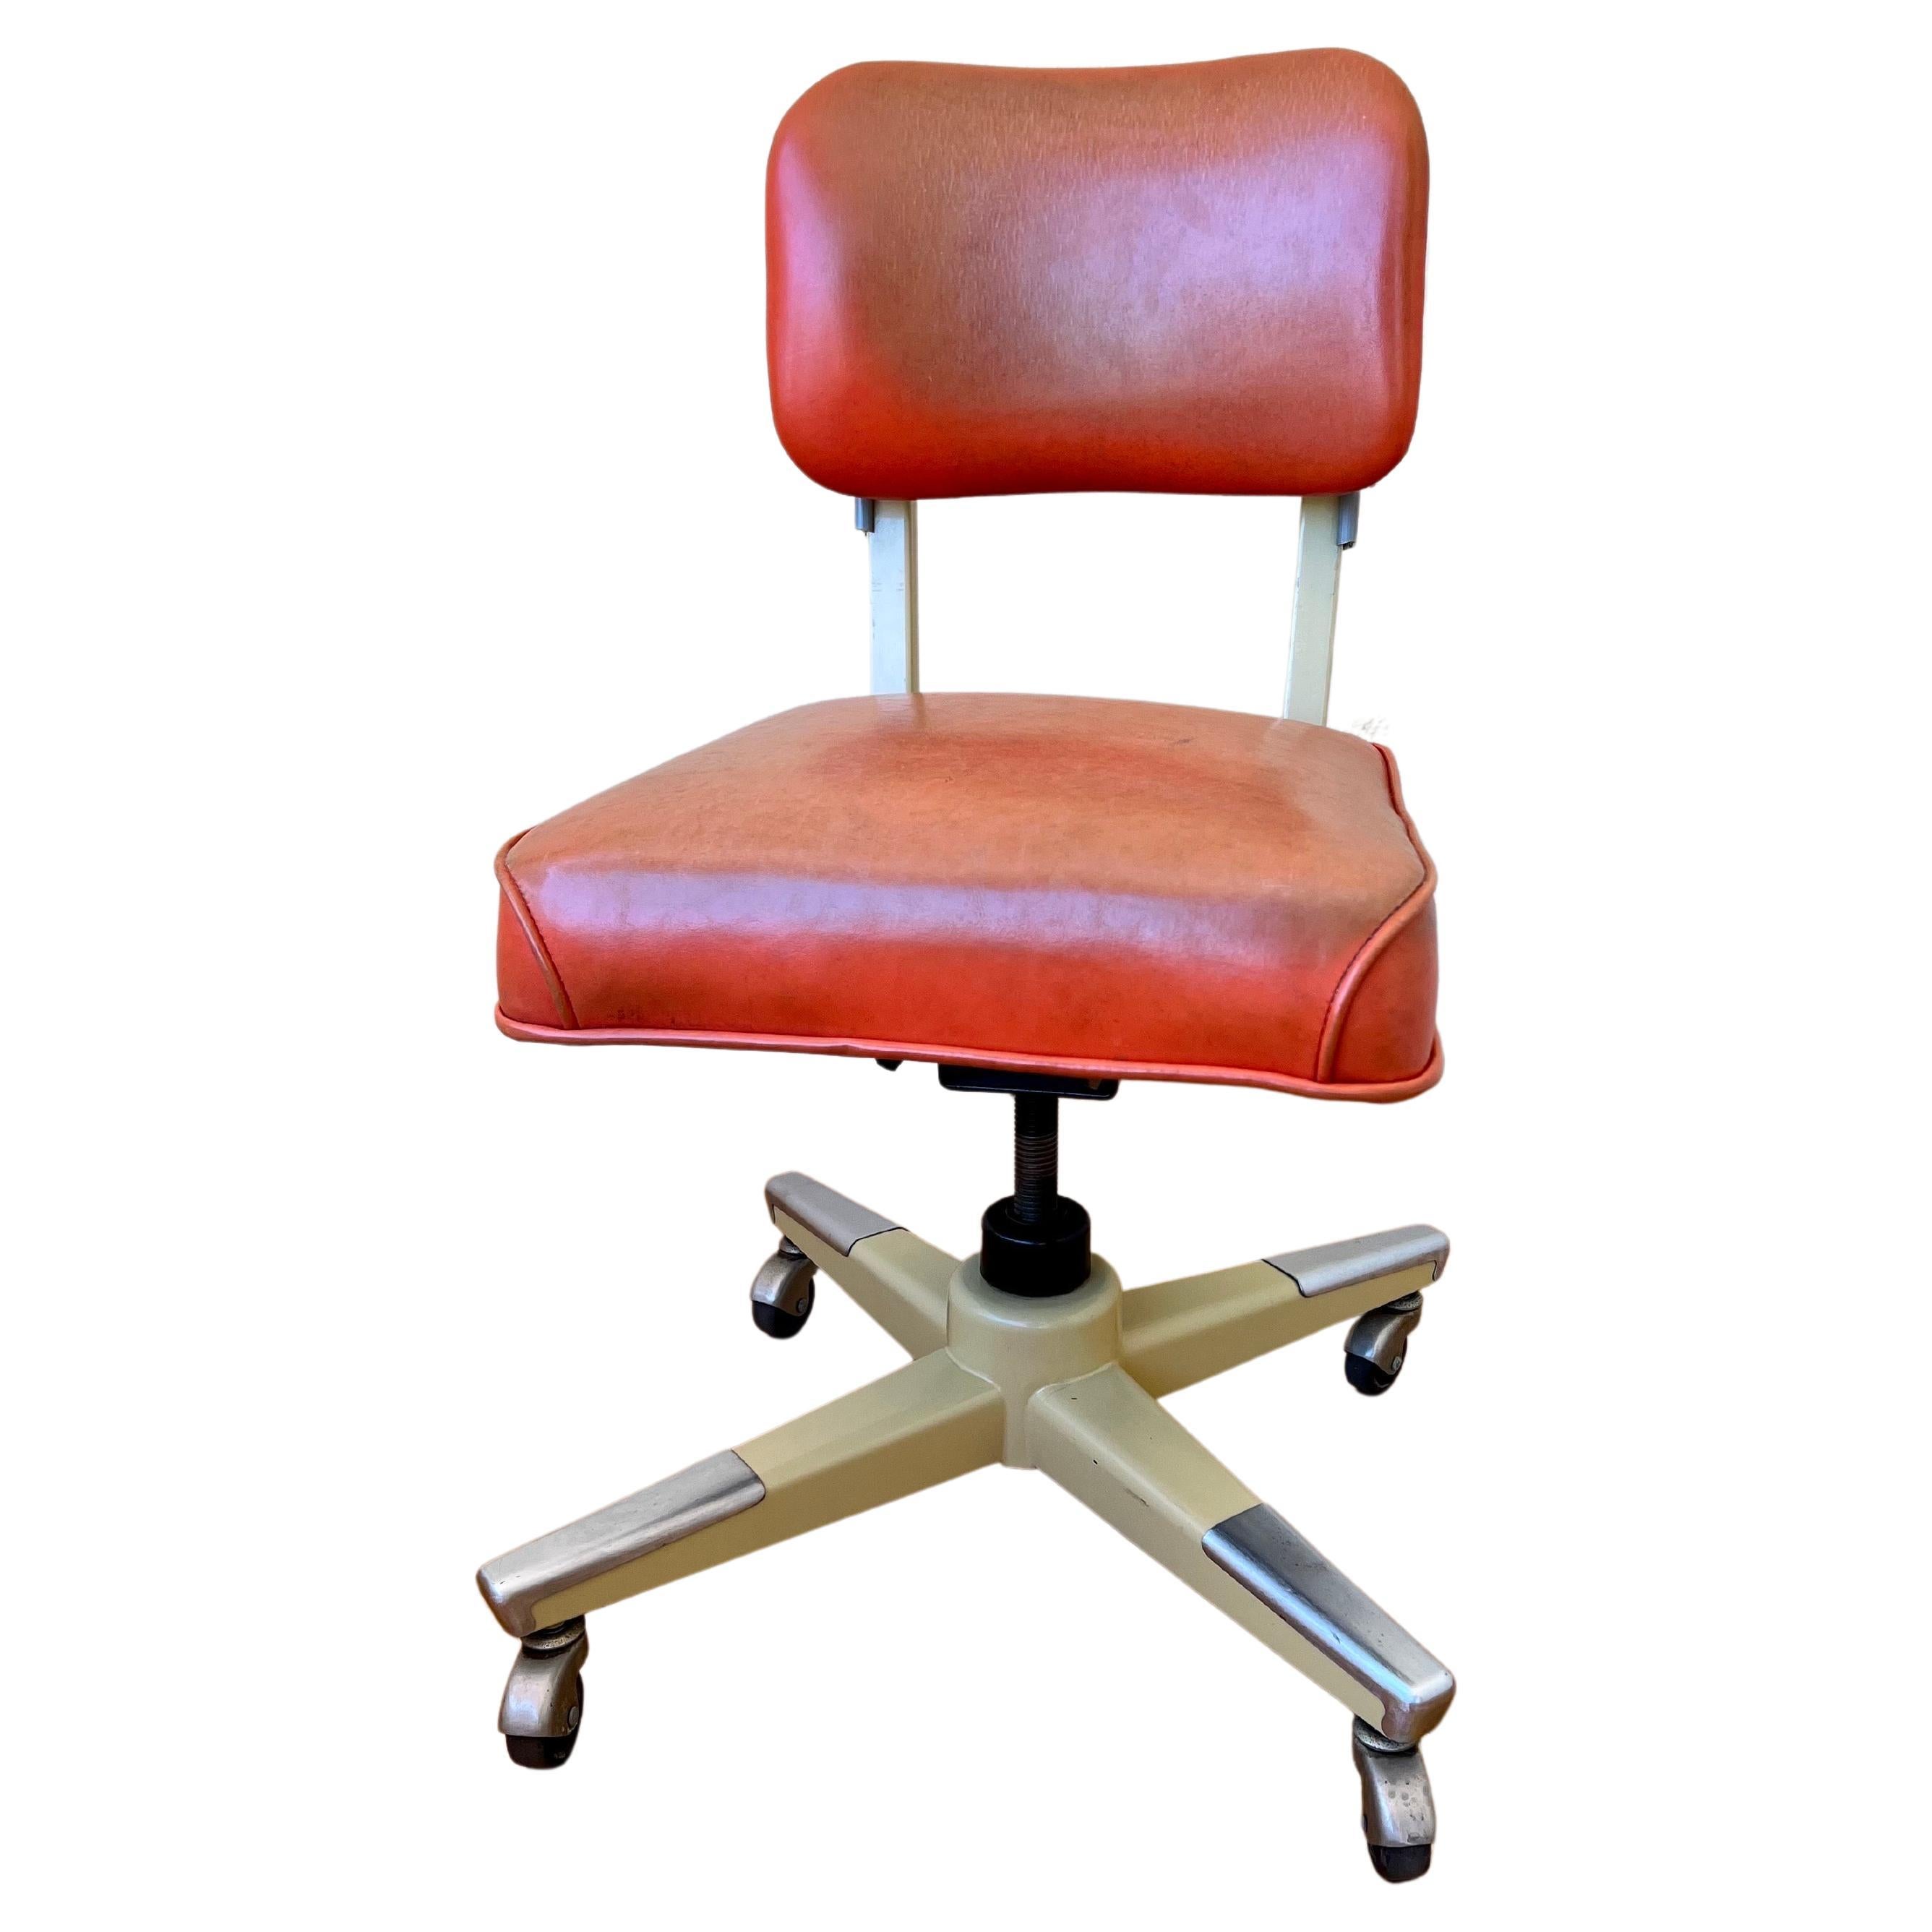 A classic American Office chair in original Naugahyde with steel frame swivels moves up and down, the backrest moves back and forward, a very nice and clean condition we cleaned the seat looks nice clean with original patina.